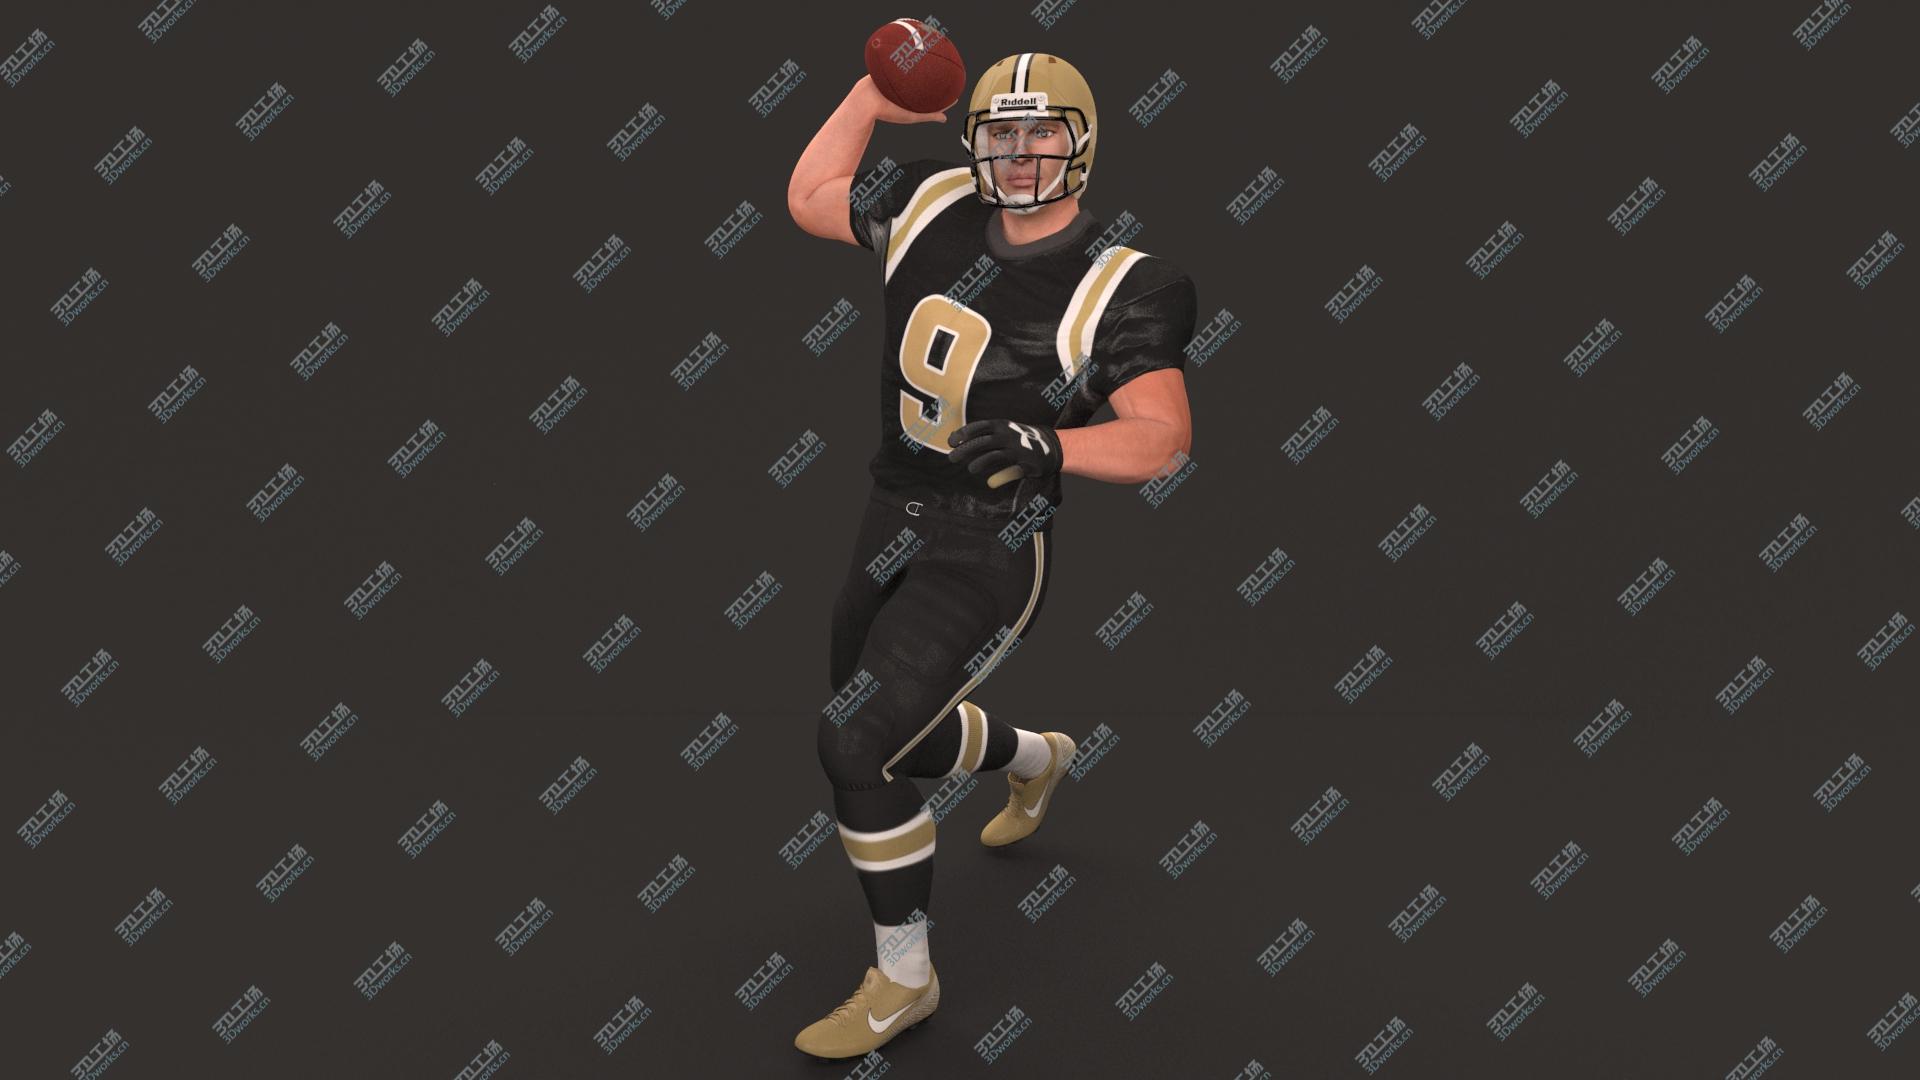 images/goods_img/20210313/American Football Player 2020 PBR Pack Rigged 3D/5.jpg